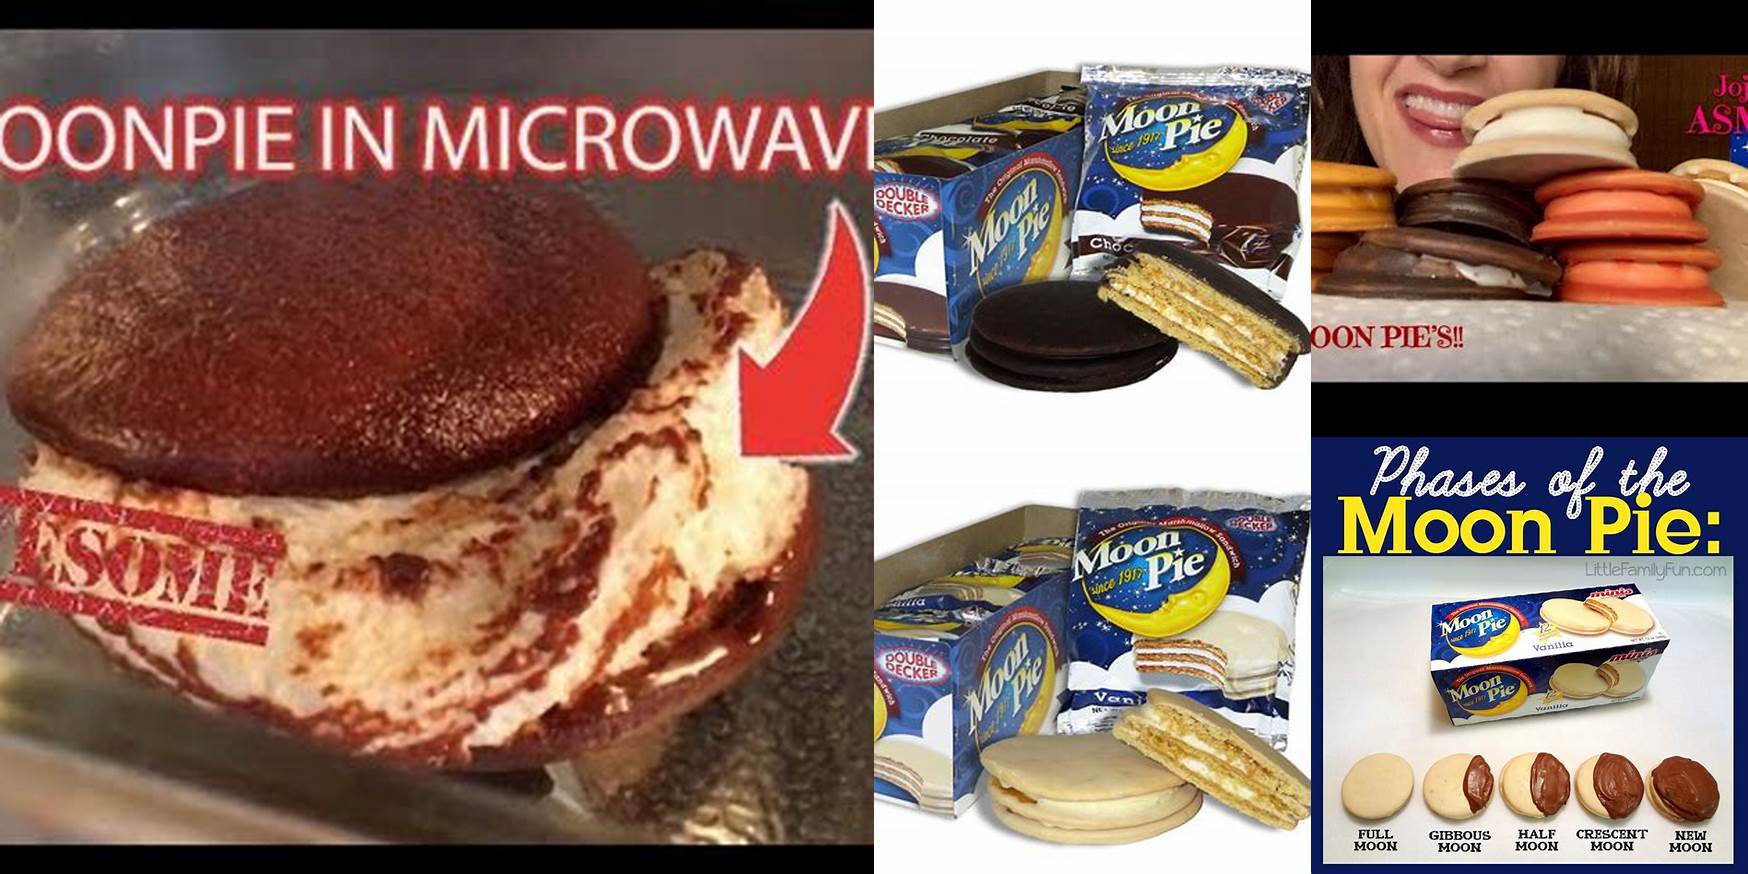 Are You Supposed To Microwave Moon Pies